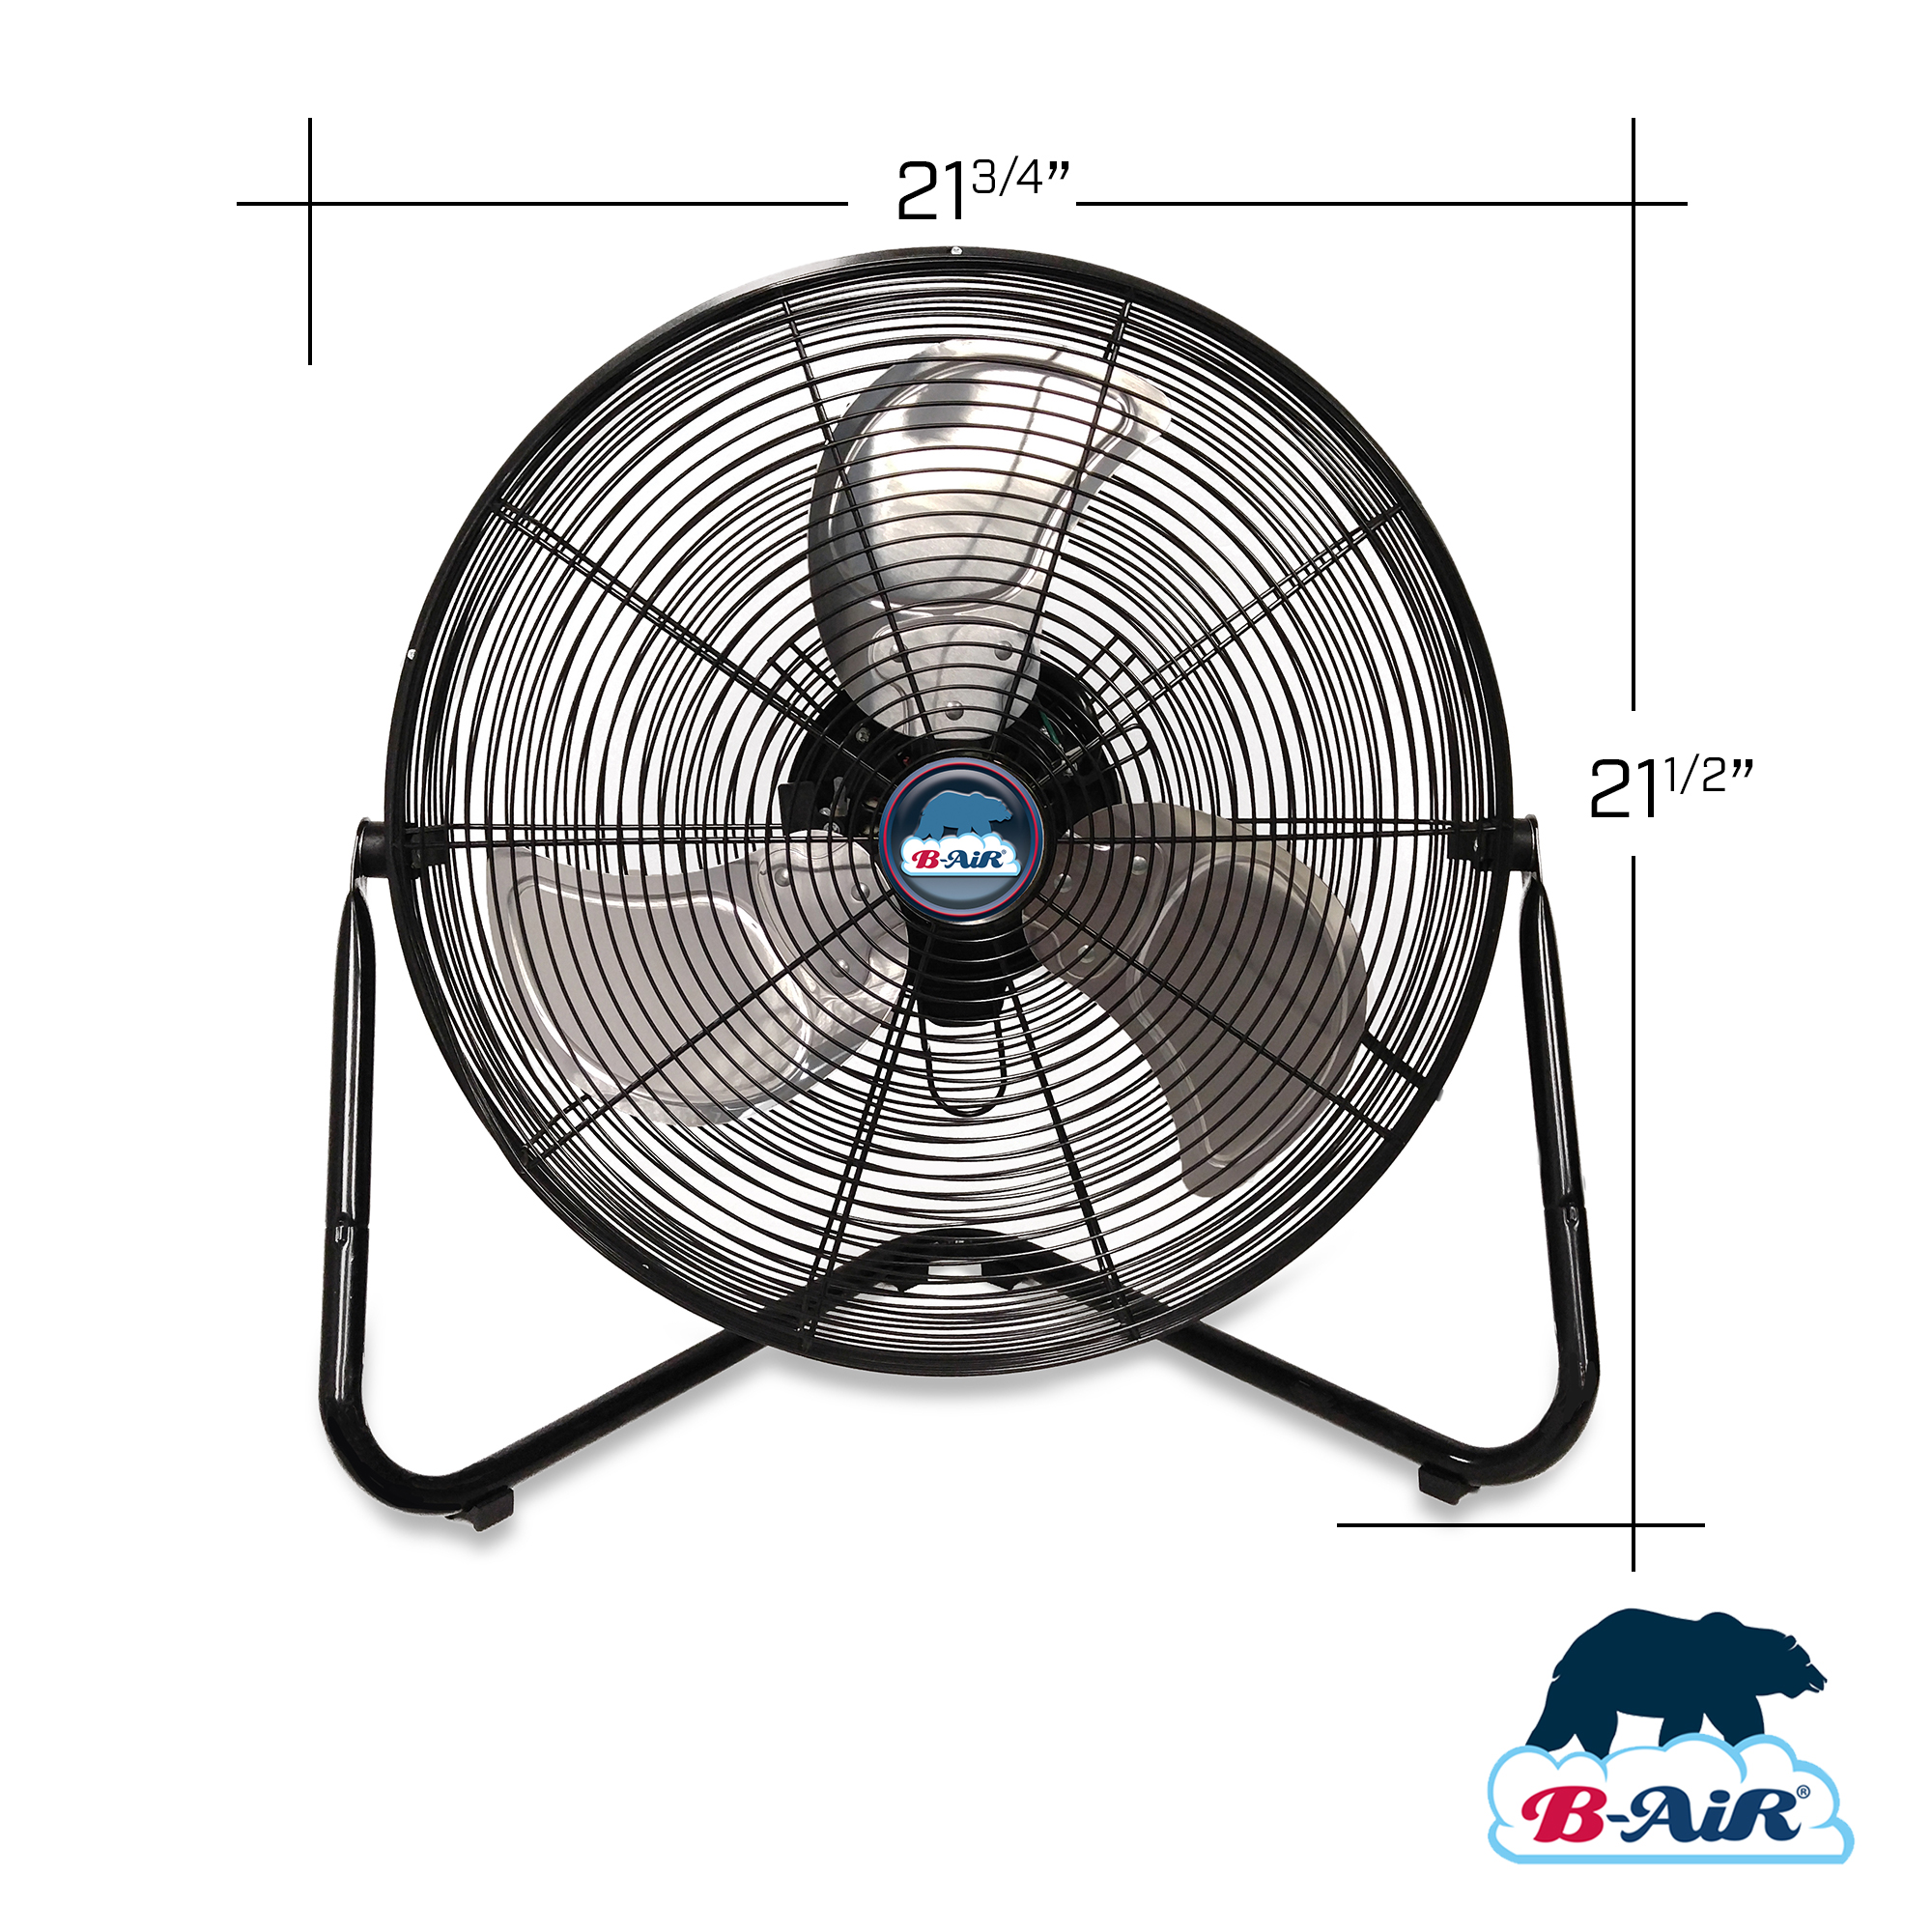 B-Air Firtana-20X High Velocity Floor Fan Electric Industrial Shop and Home Fan, 20" - image 3 of 4